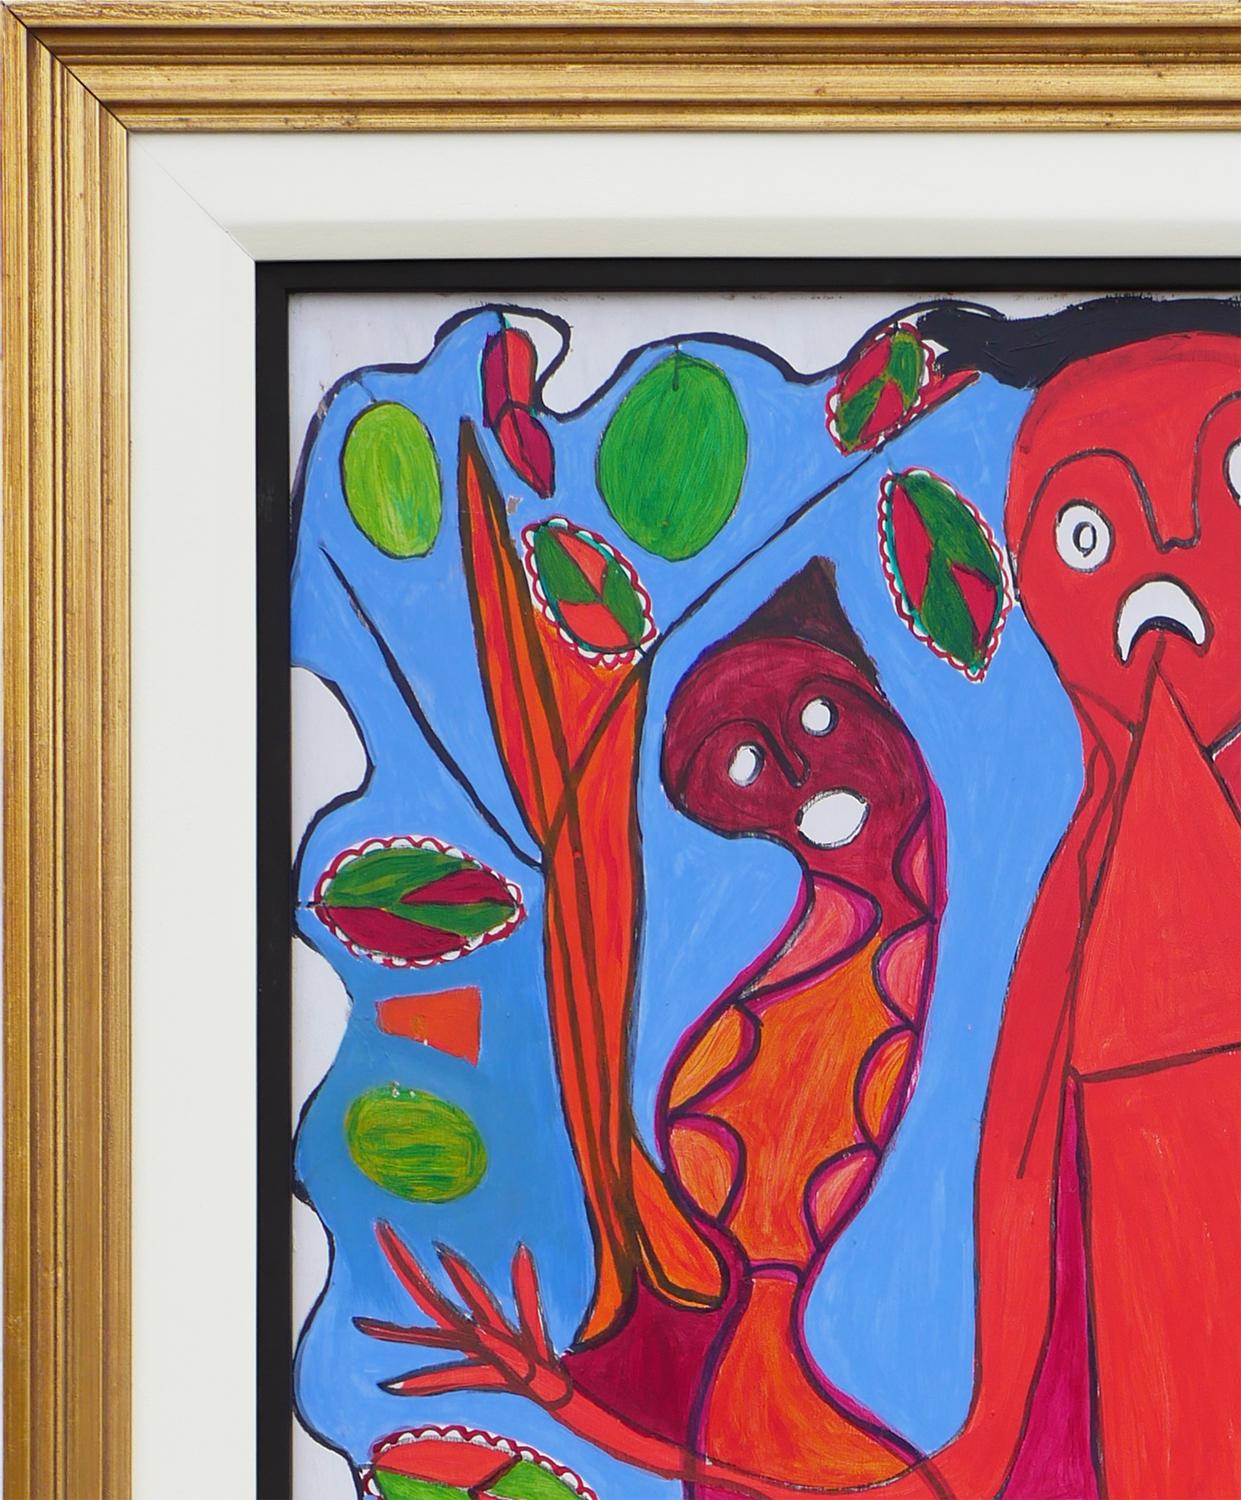 Red & Blue Abstract Figurative Painting with Four Figures and Botanical Elements For Sale 1